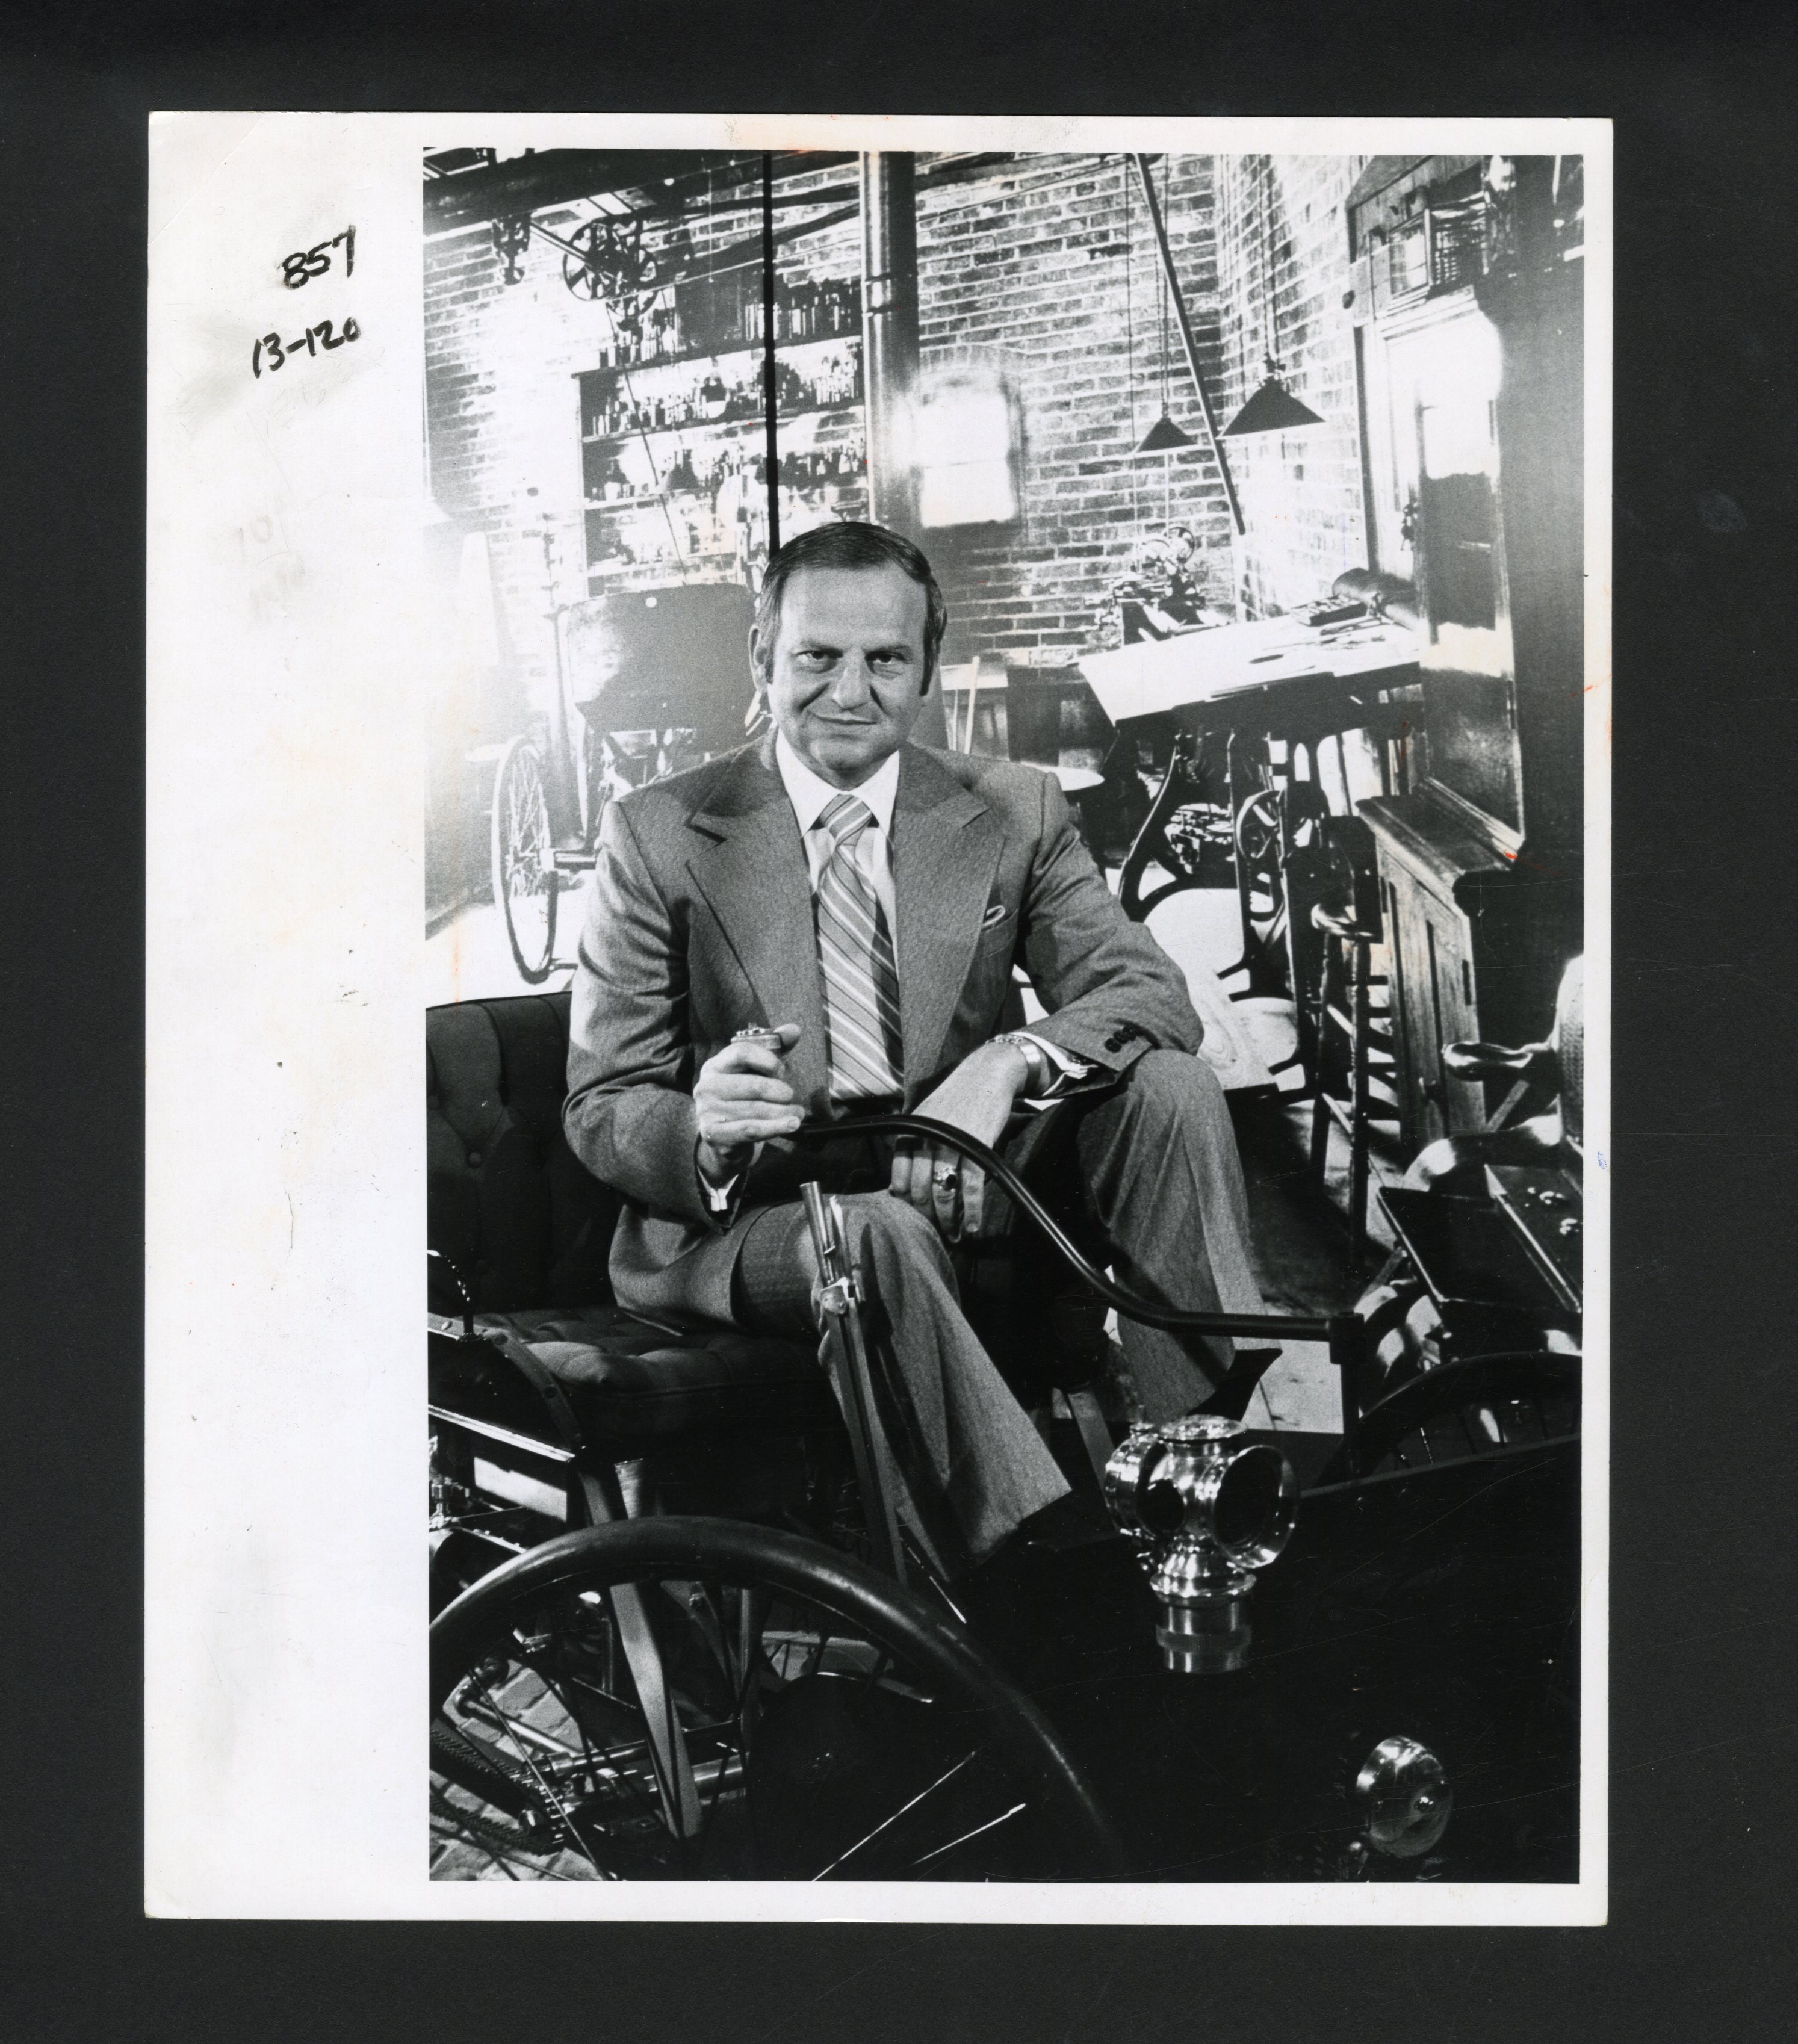 Ford Lee Iacocca Photo from Star Tribune Archive